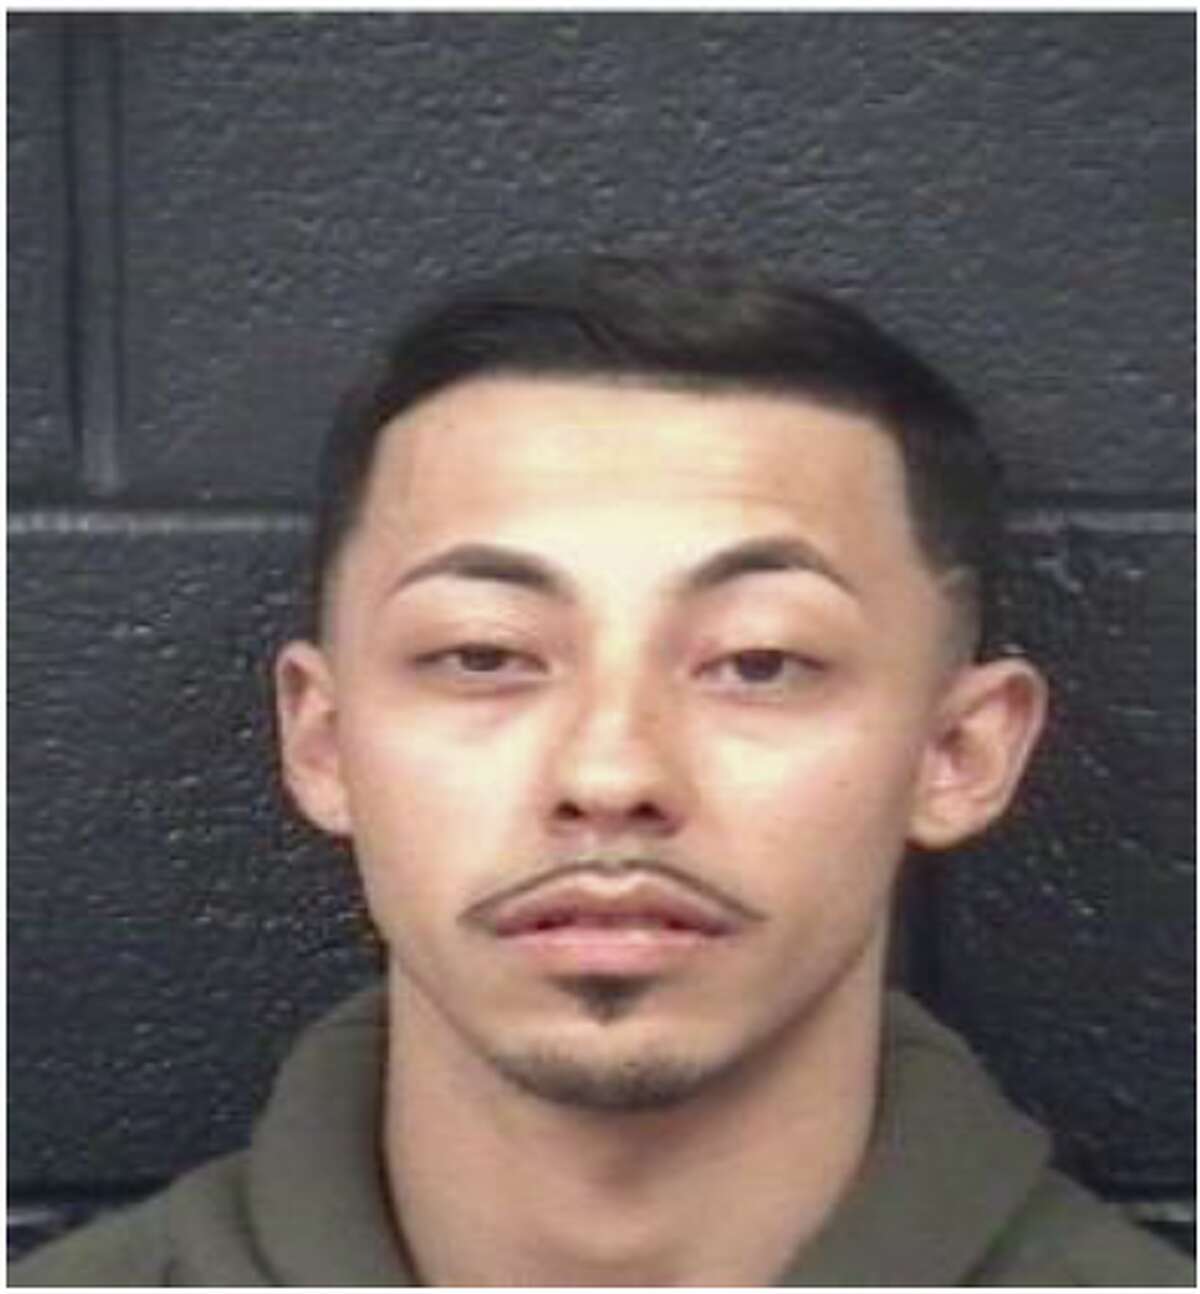 Serafin Anthony Perez was charged with driving while intoxicated.